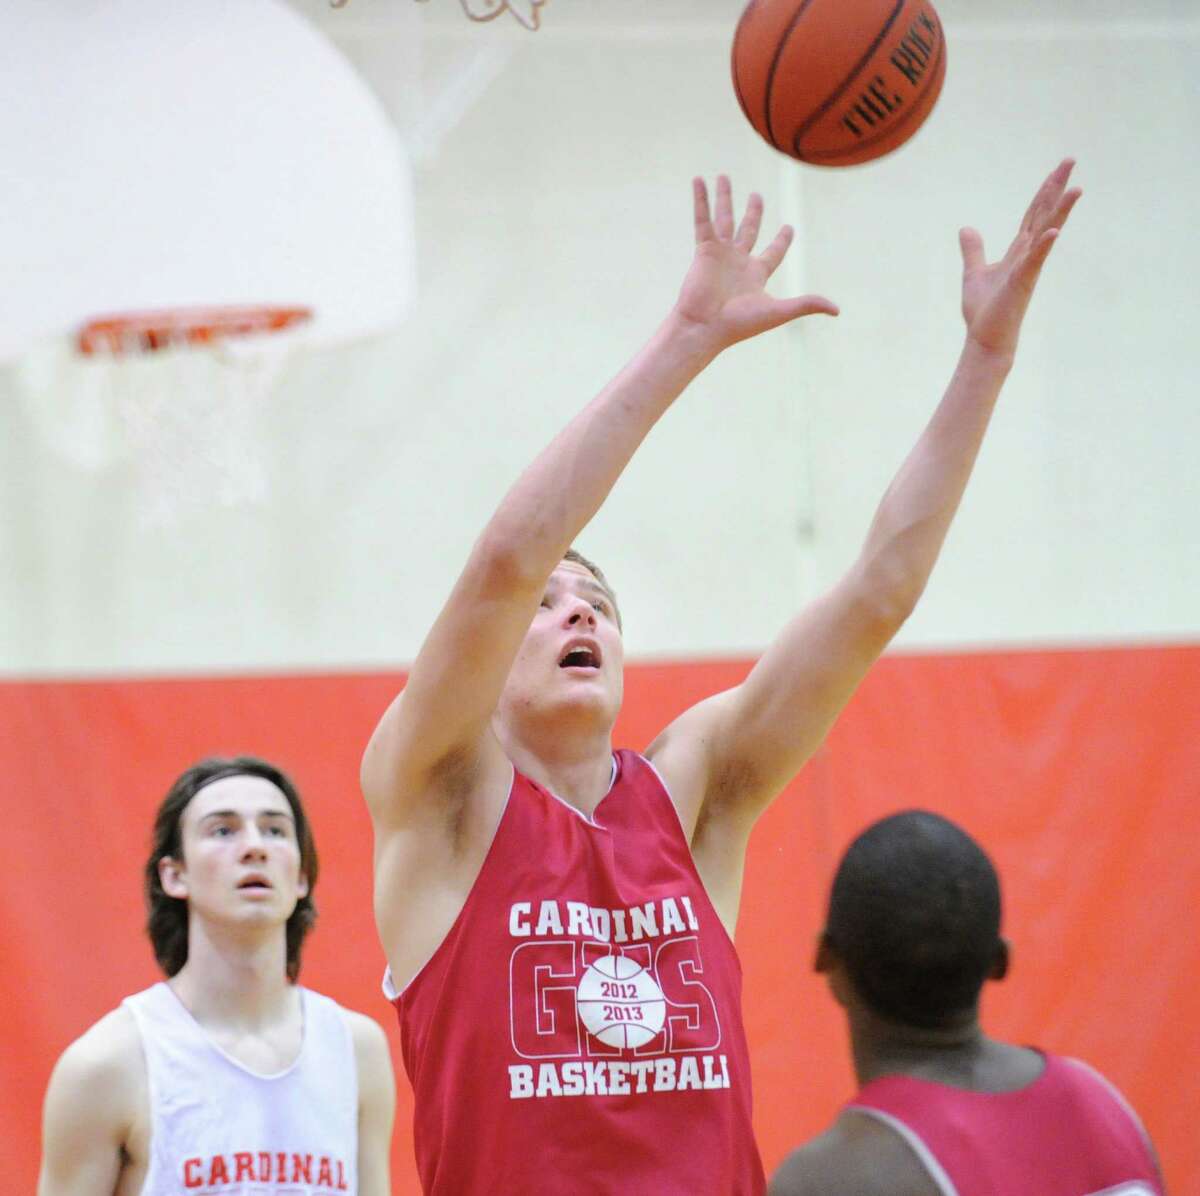 Alex Wolf, a 6-foot-9-inch junior, grabs a rebound during Greenwich High School boys basketball practice at the school, Tuesday afternoon, Dec. 11, 2012.